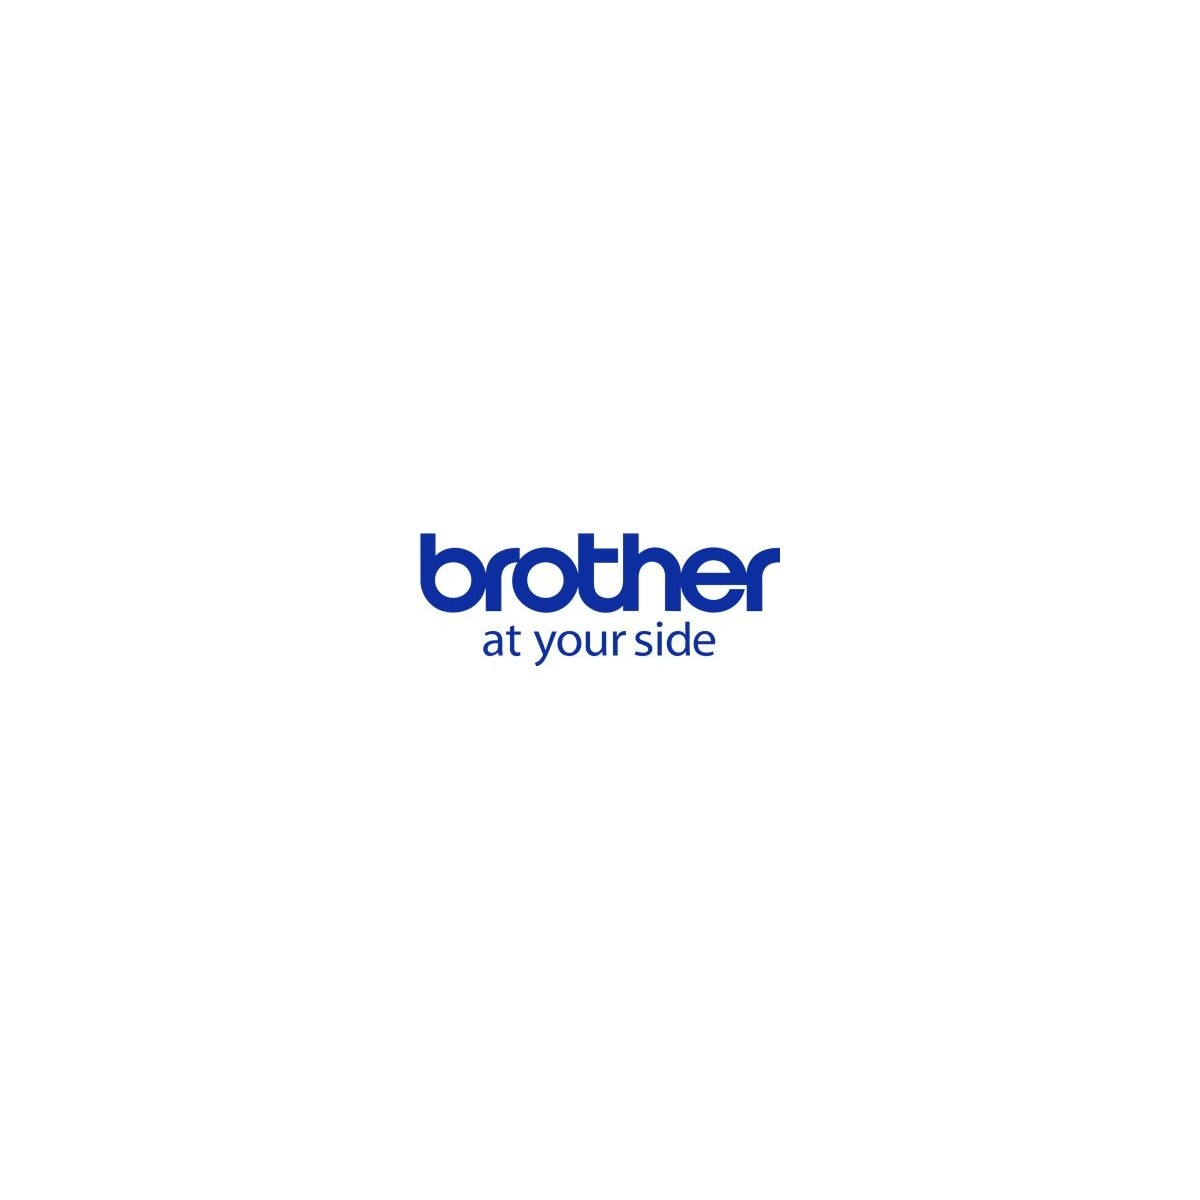 Brother PAHU3001- - 1 pc(s)